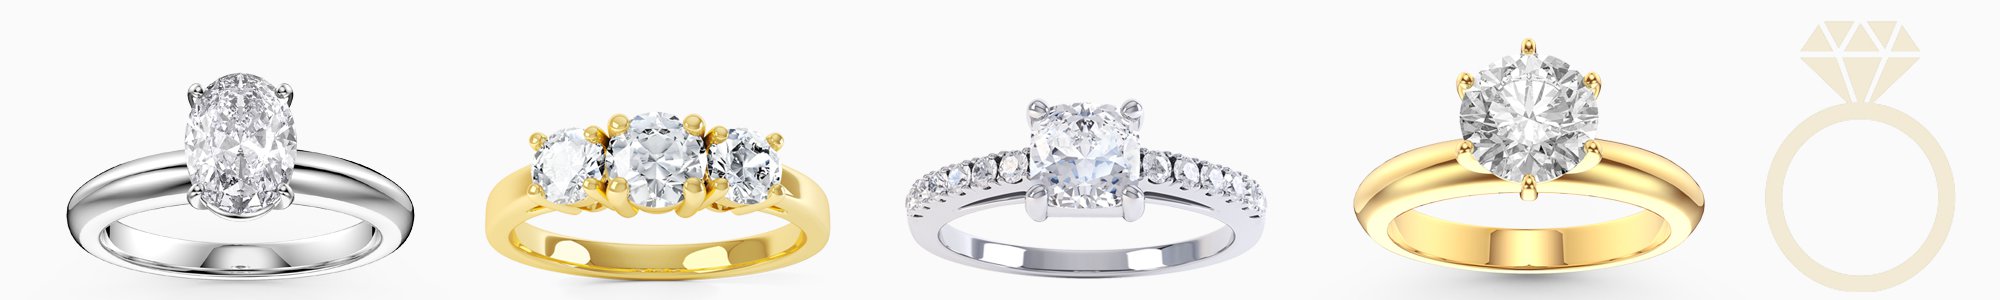 Shop Diamond Engagement Rings by Jian London. Buy direct and save from our wide selection of Rings at the Jian London jewelry Store. Free US Delivery